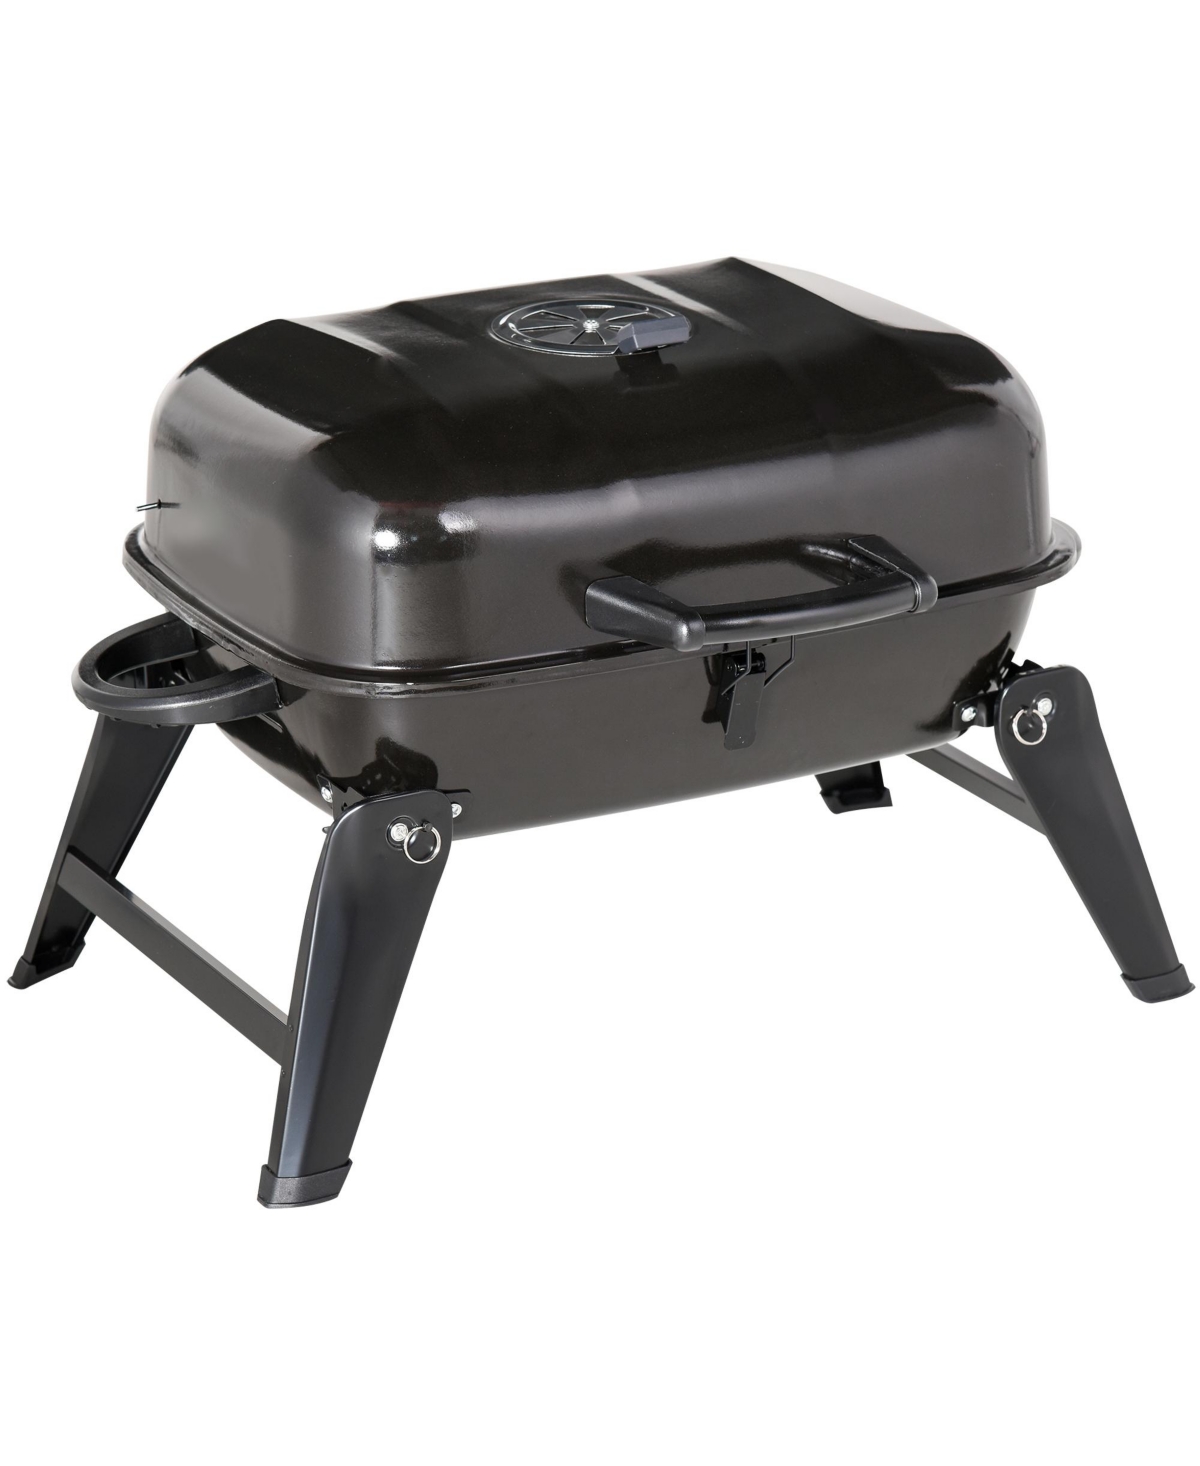 14'' Iron Tabletop Charcoal Grill with Portable Anti-Scalding Handle Design, Folding Legs for Outdoor Bbq for Poolside, Backyard, Garden - Bl